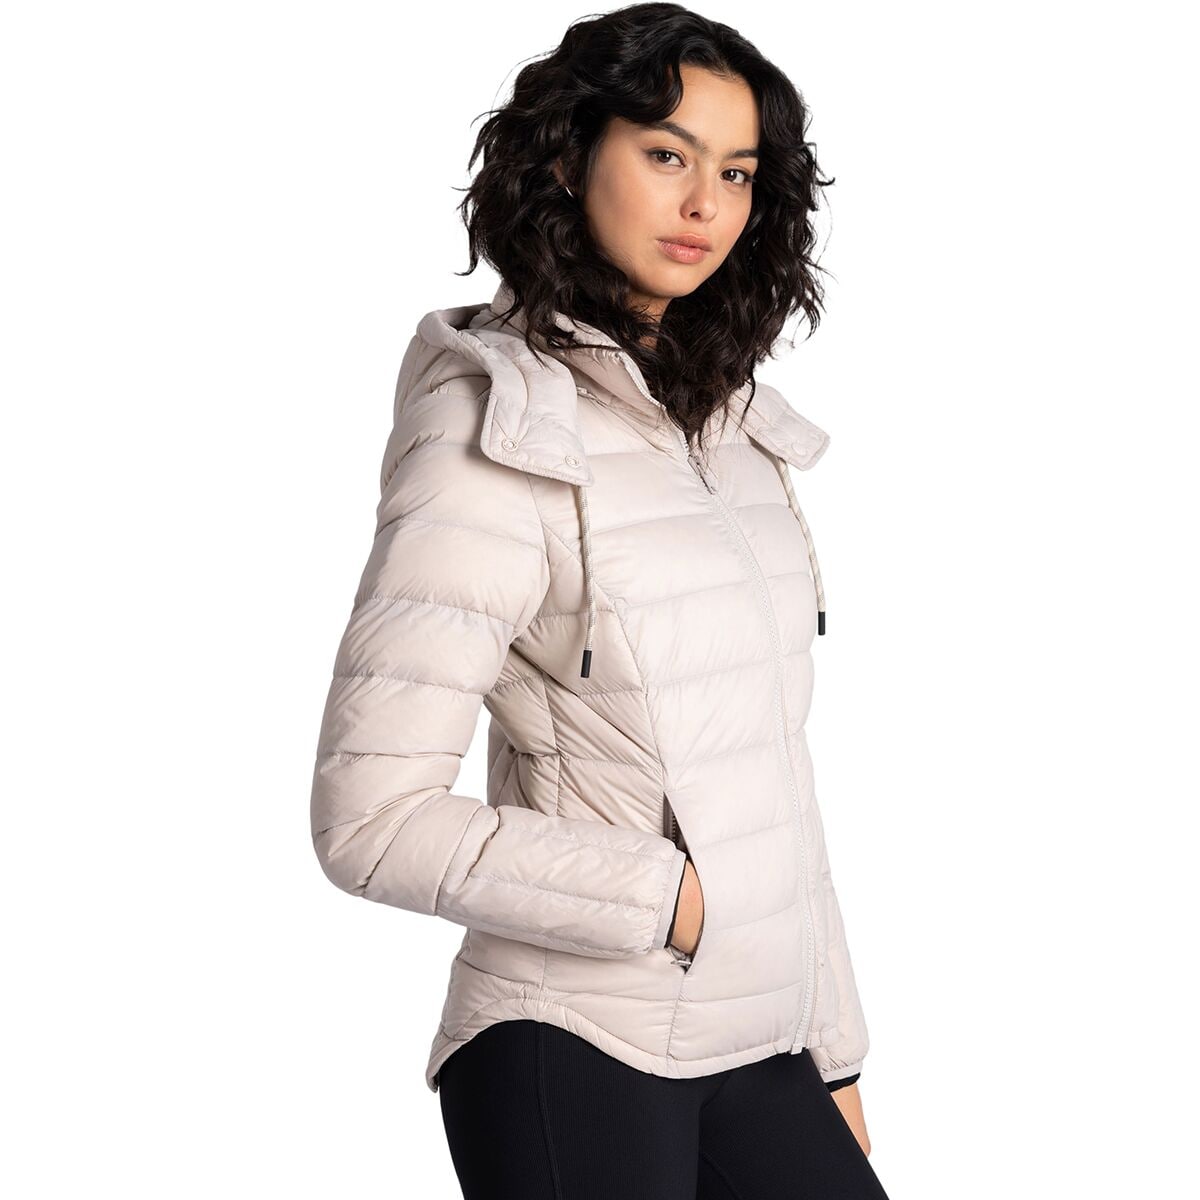 LY VAREY LIN New Autumn Winter Hooded Ultra Light Down Jacket Women Casual  Patchwork White Duck Down Coat Loose Warm Outwear